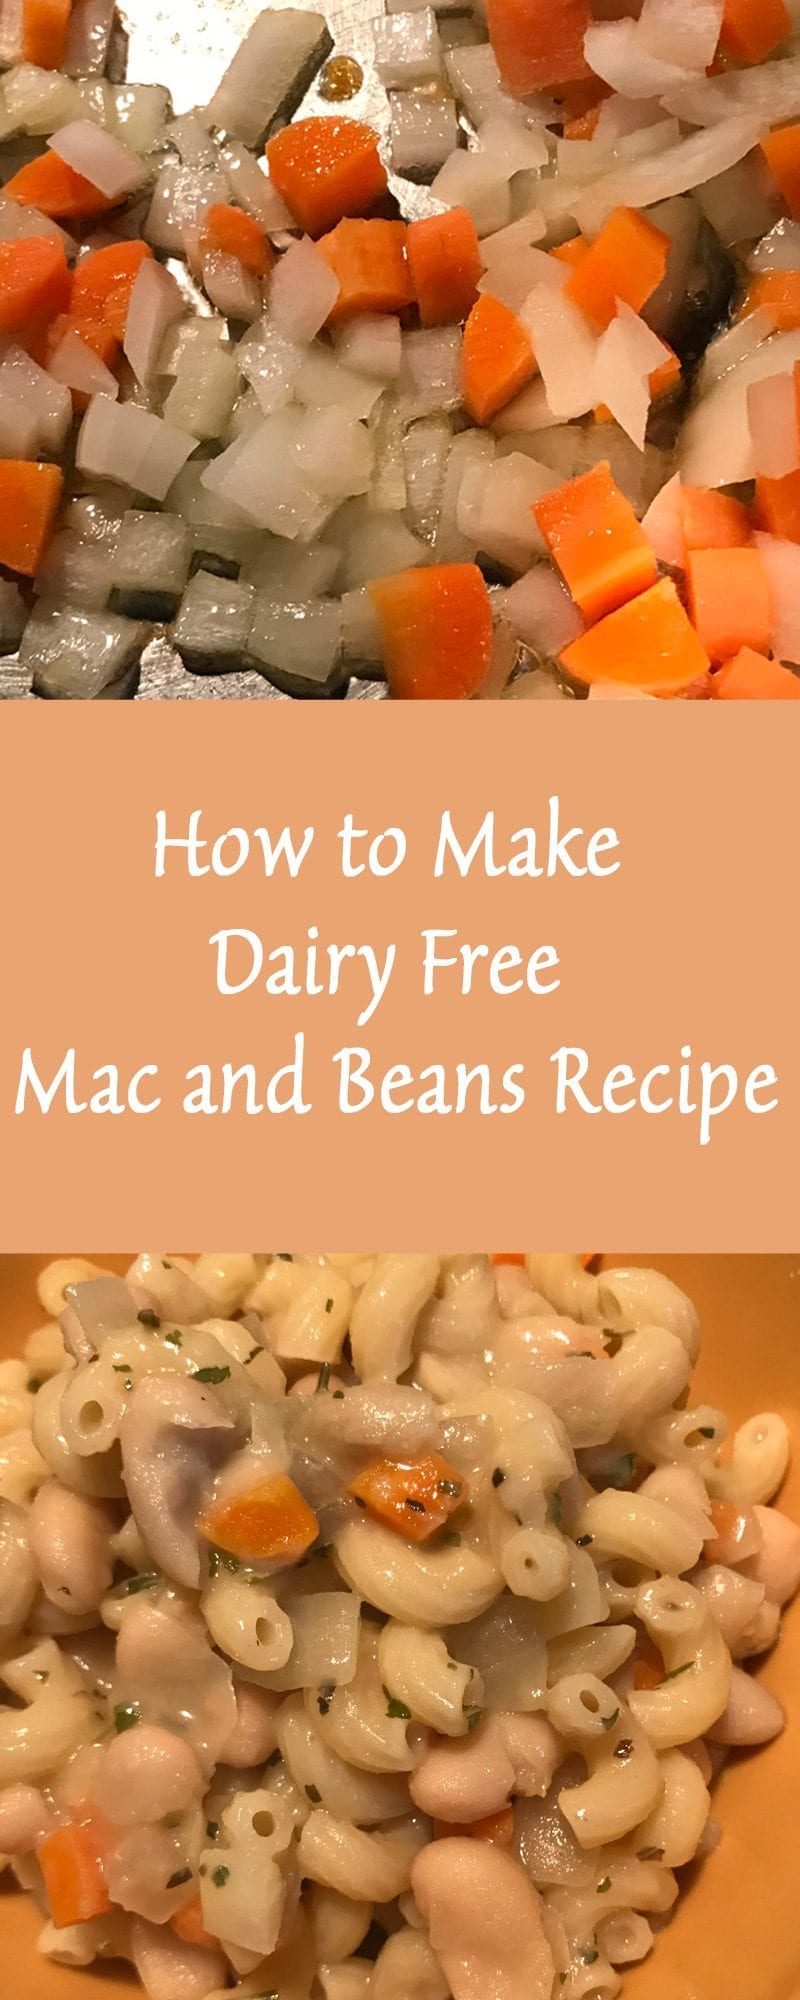 How to make dairy free mac and beans recipe